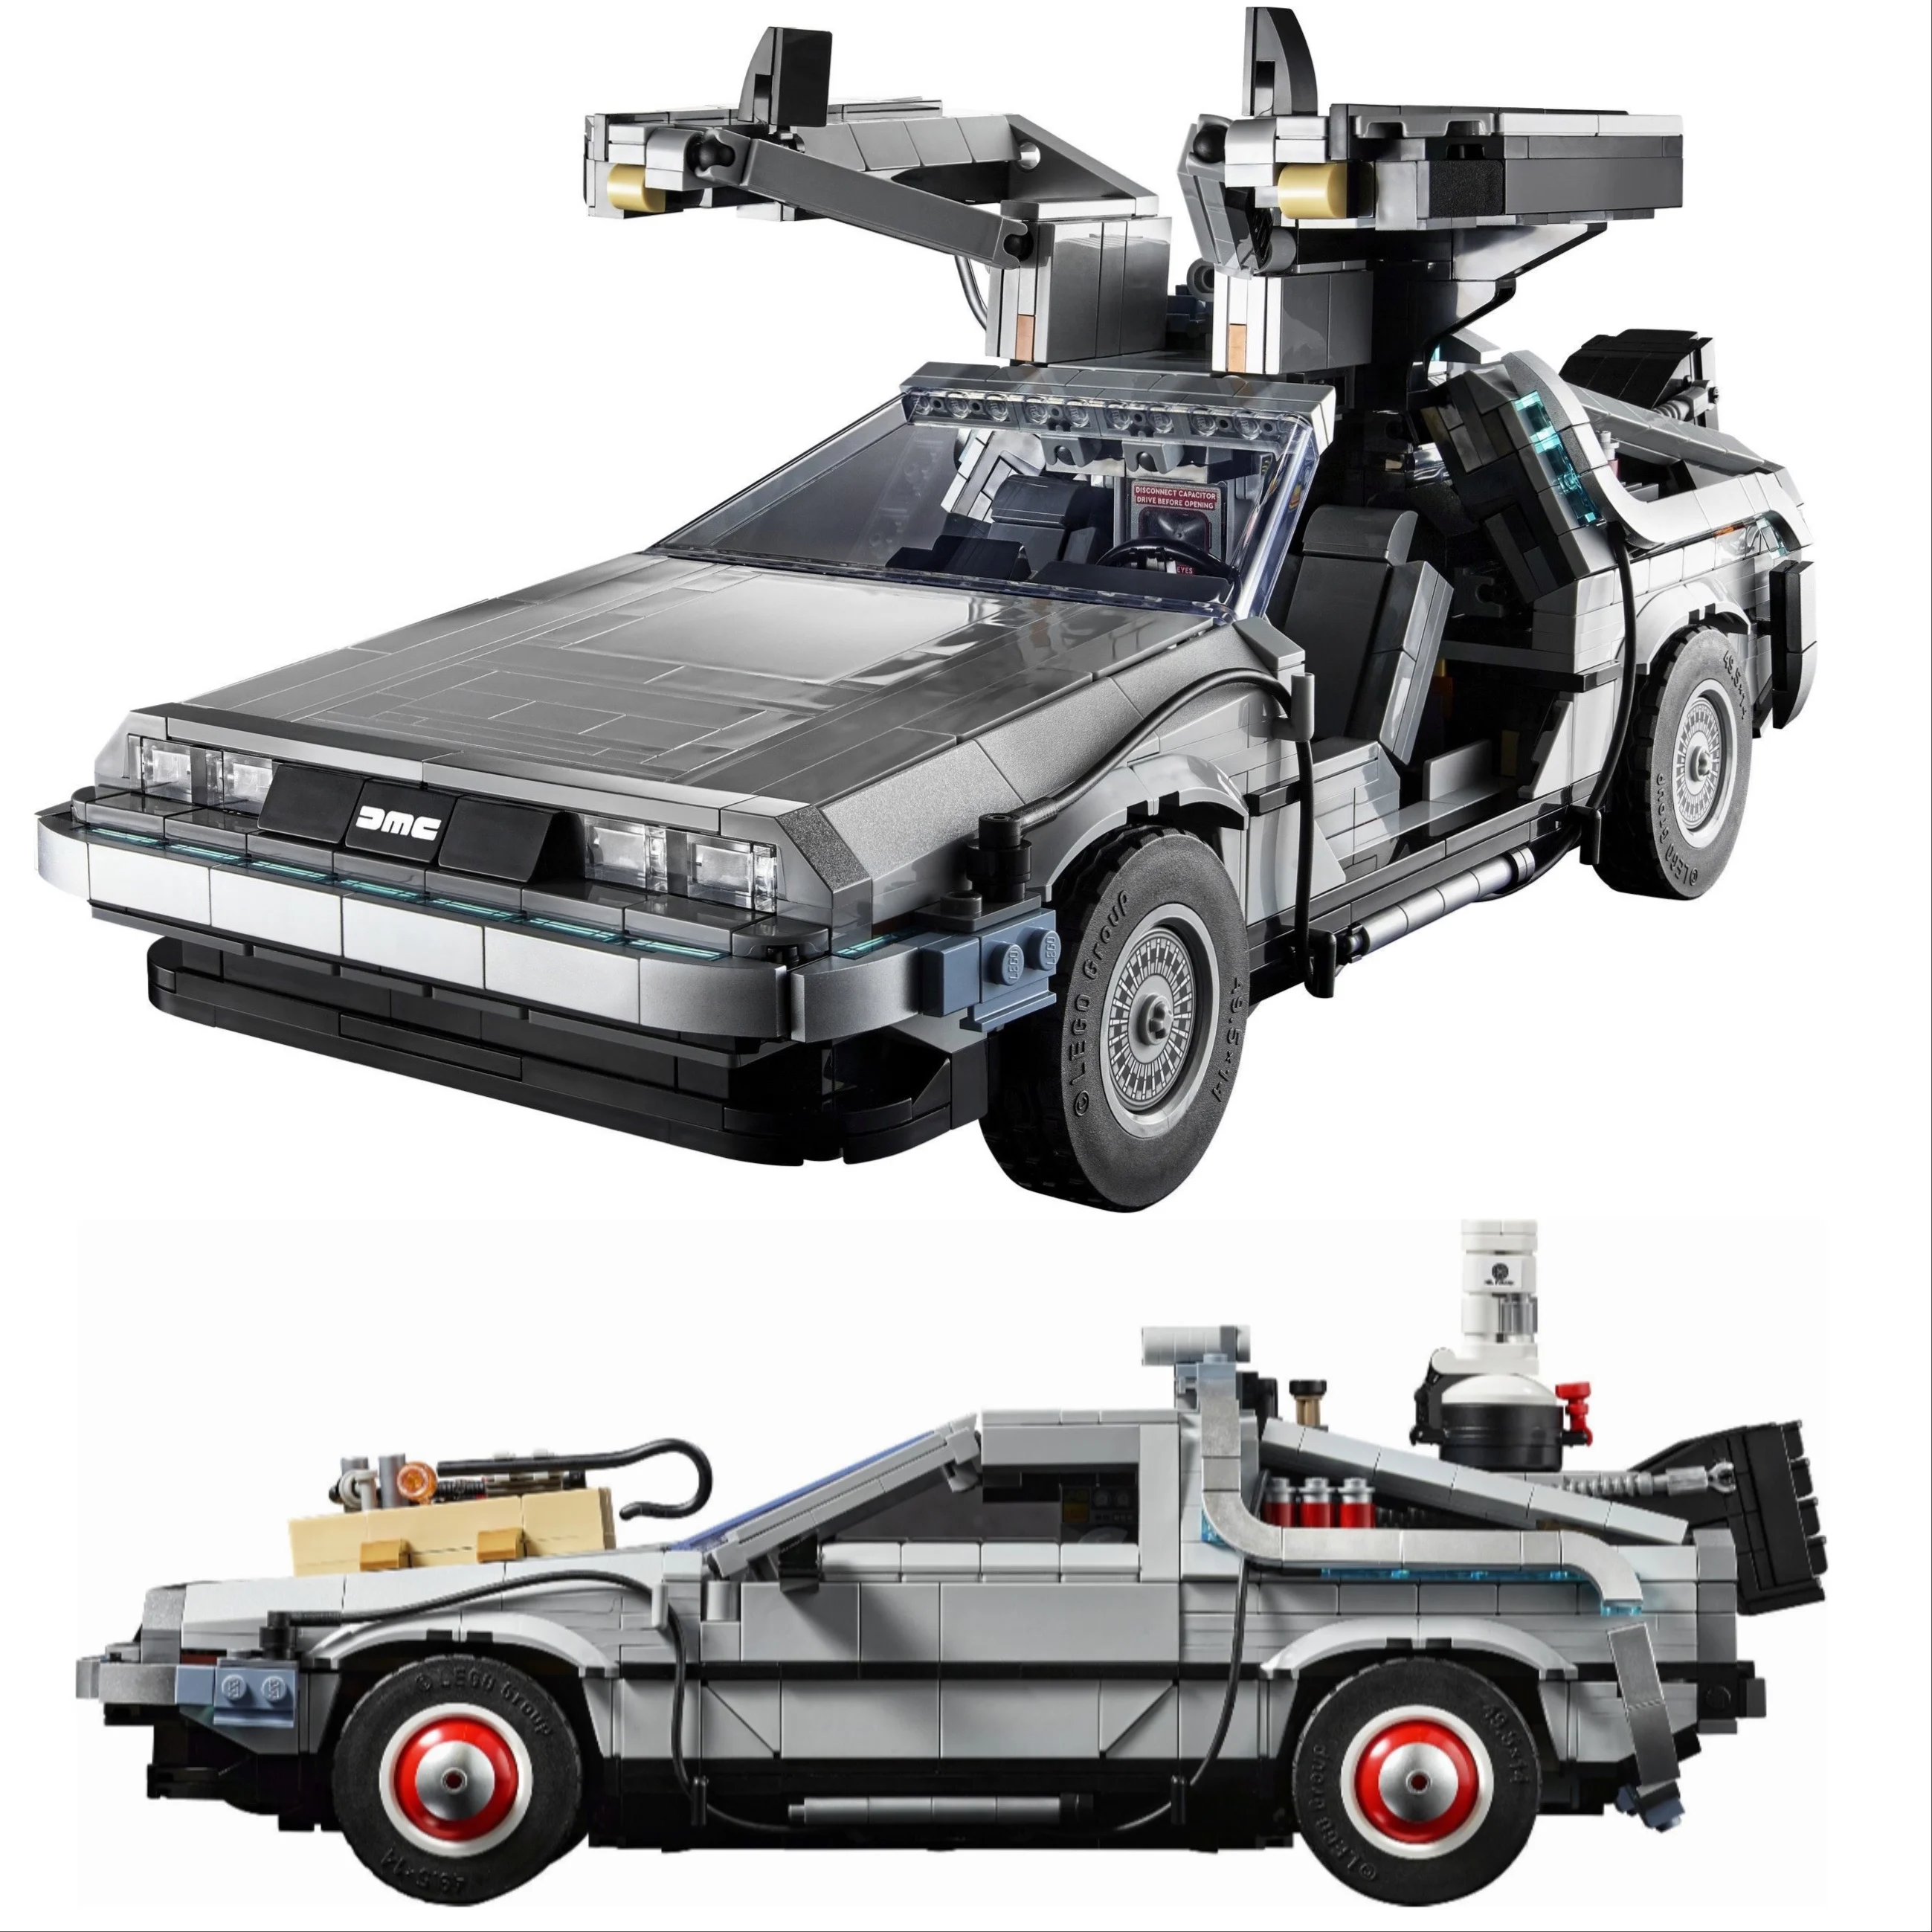 Back To The Future DeLoreaned DMC-12 Time Machine 10300 Creative Expert Racing Car Moc Brick Technical Model Building Blocks Toy